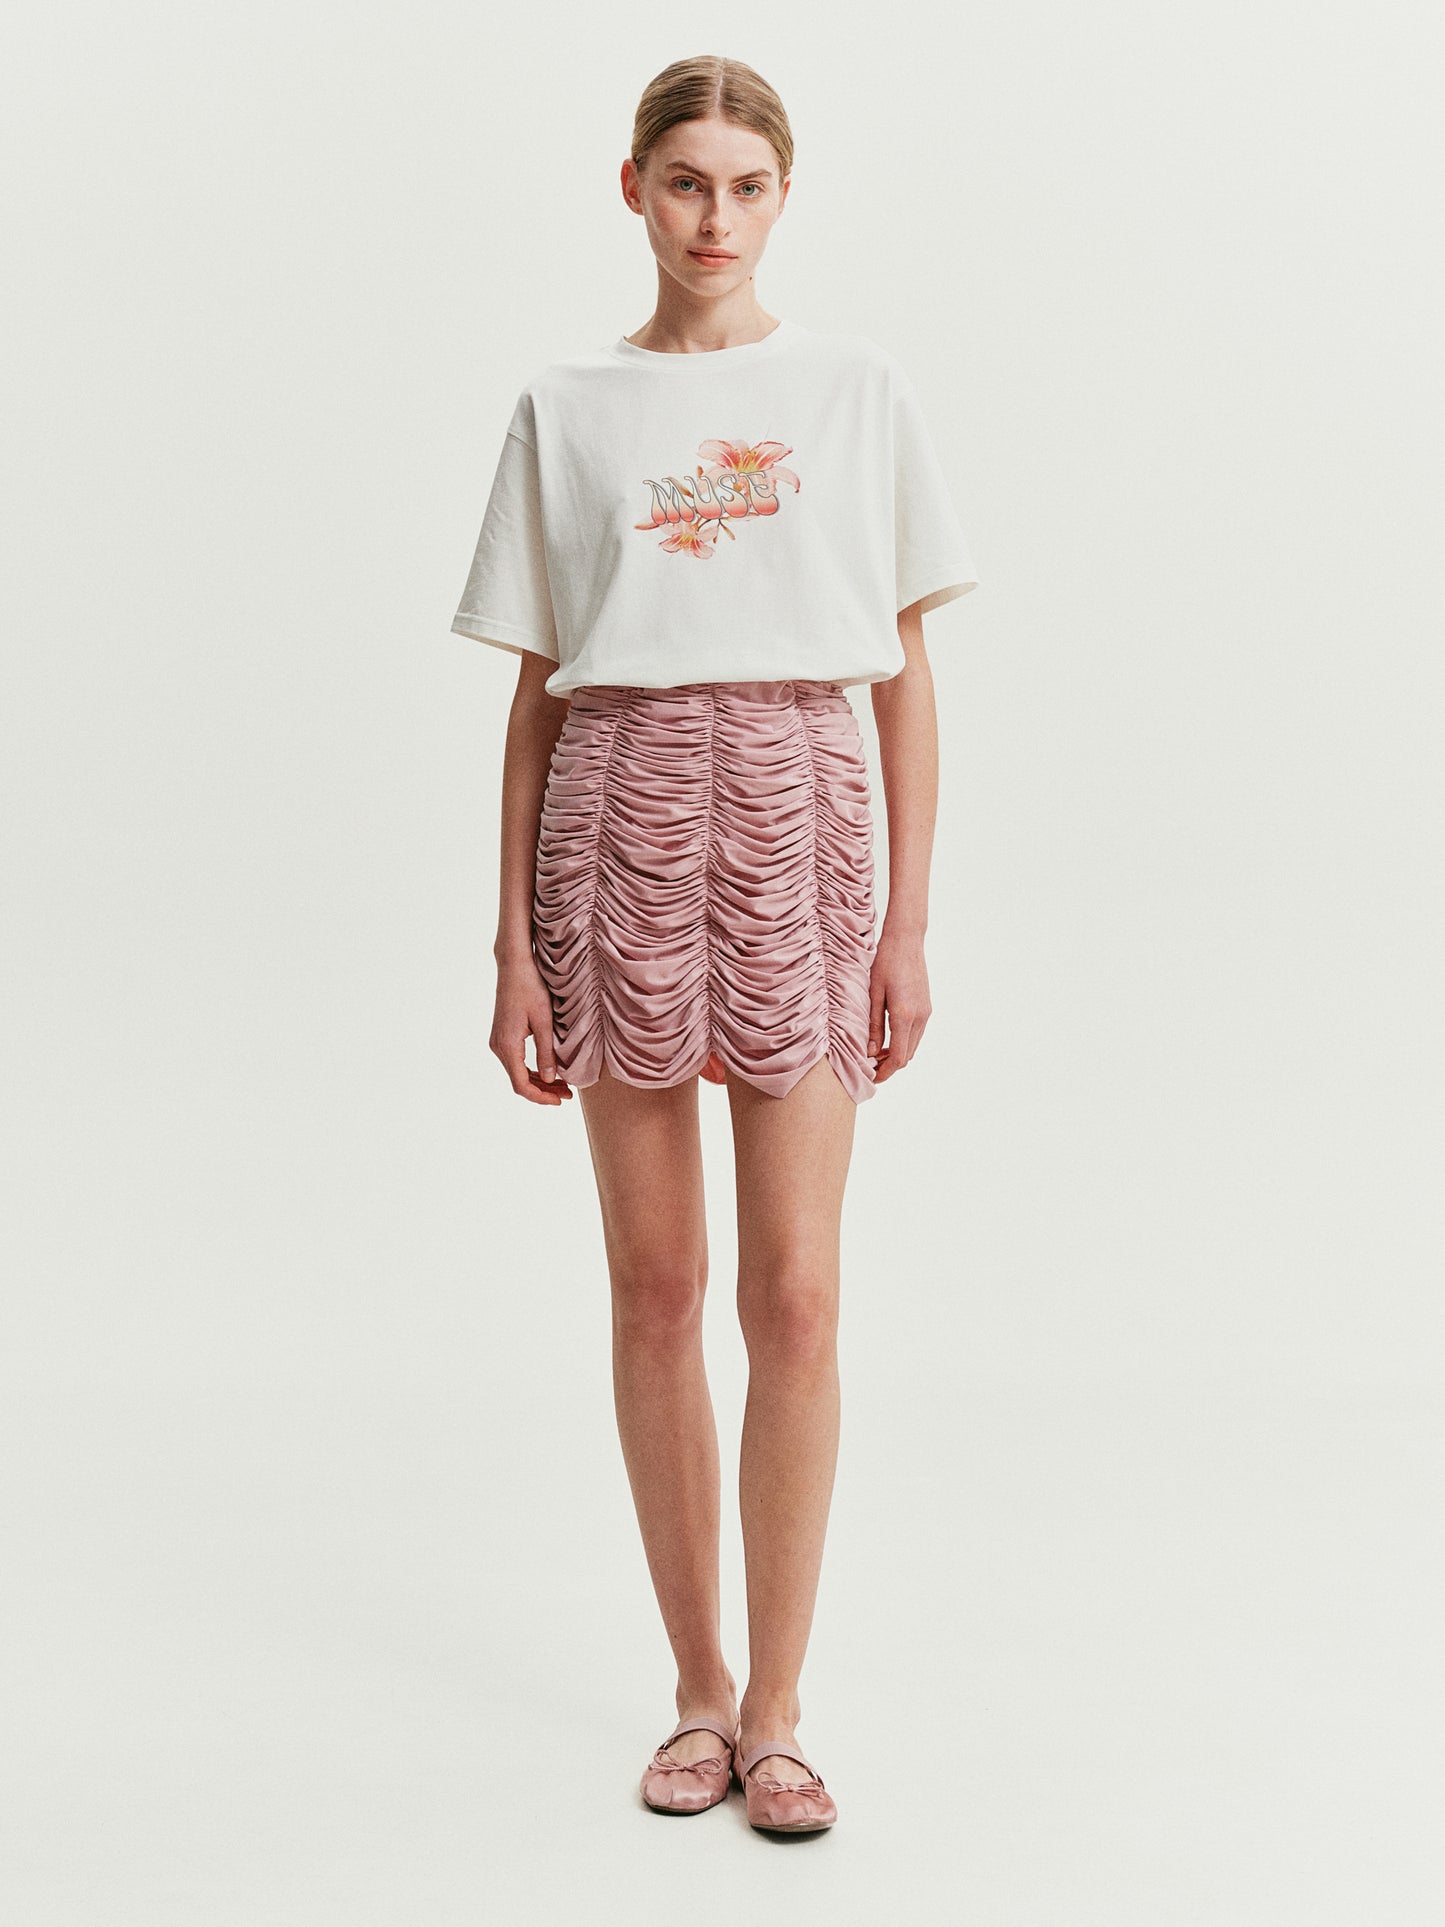 Draped skirt in pink